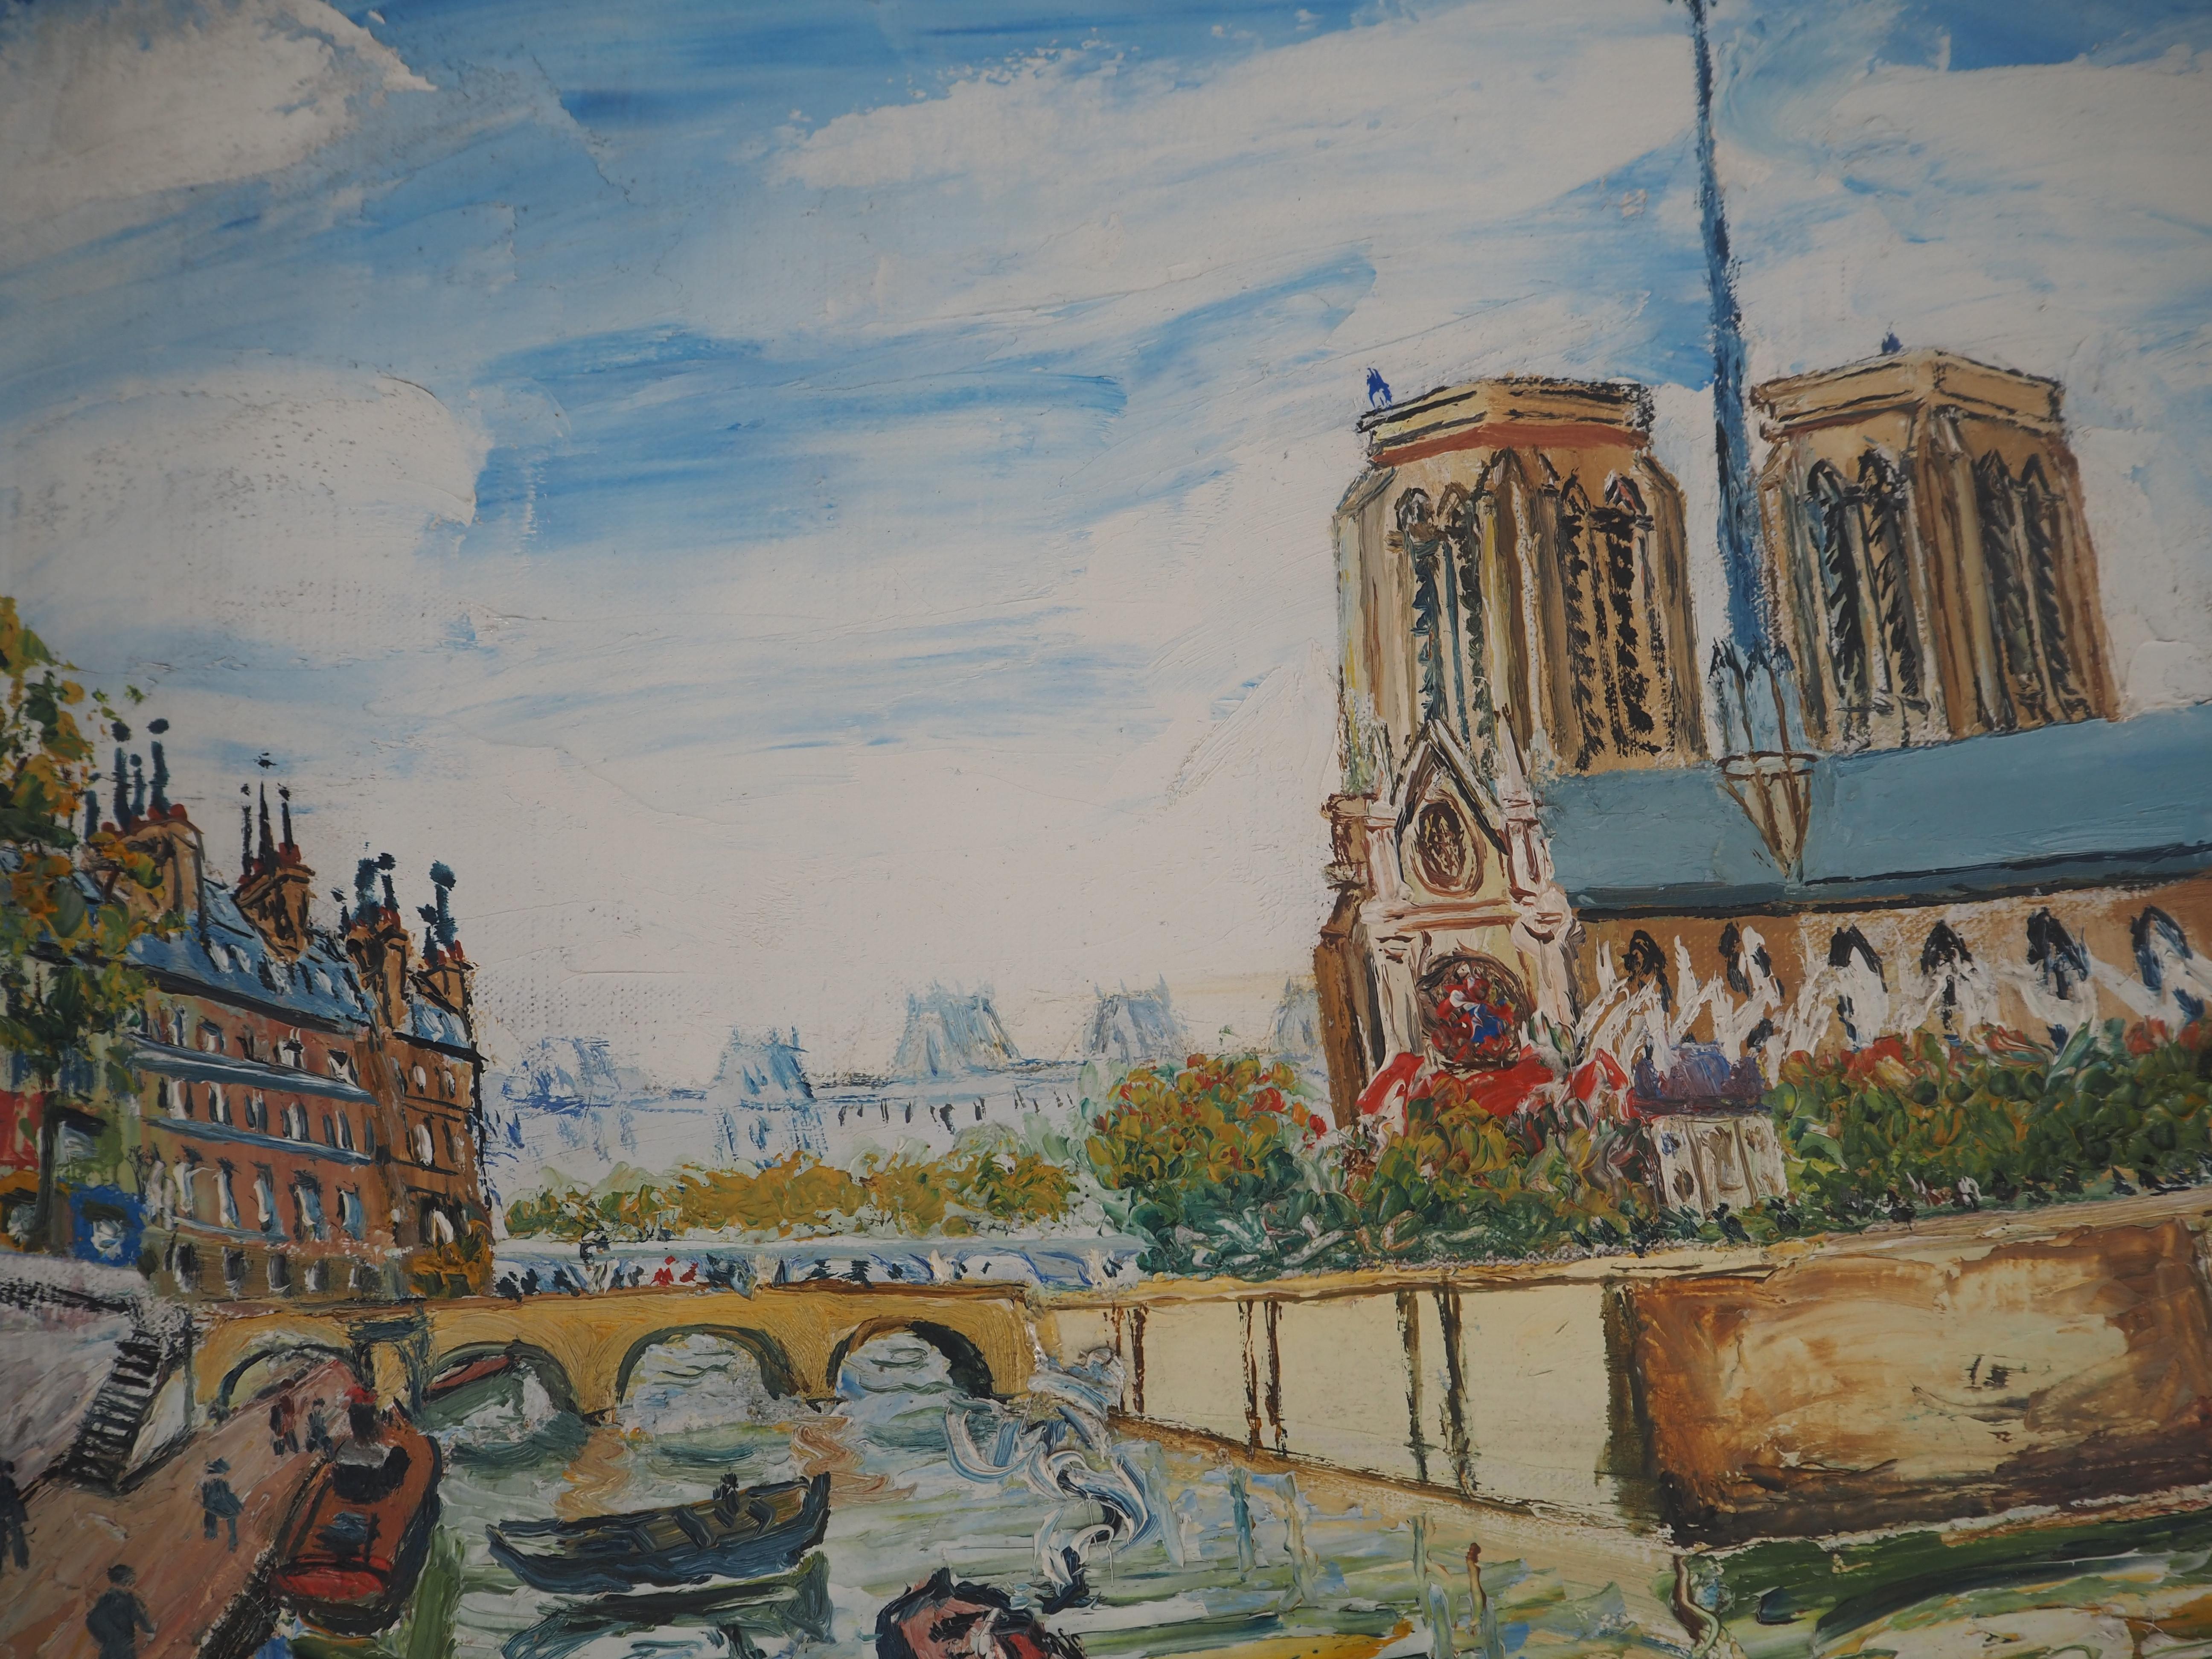 Summer in Paris : Notre Dame Church and Seine River - Oil on canvas - Signed - Brown Landscape Painting by Elisée Maclet